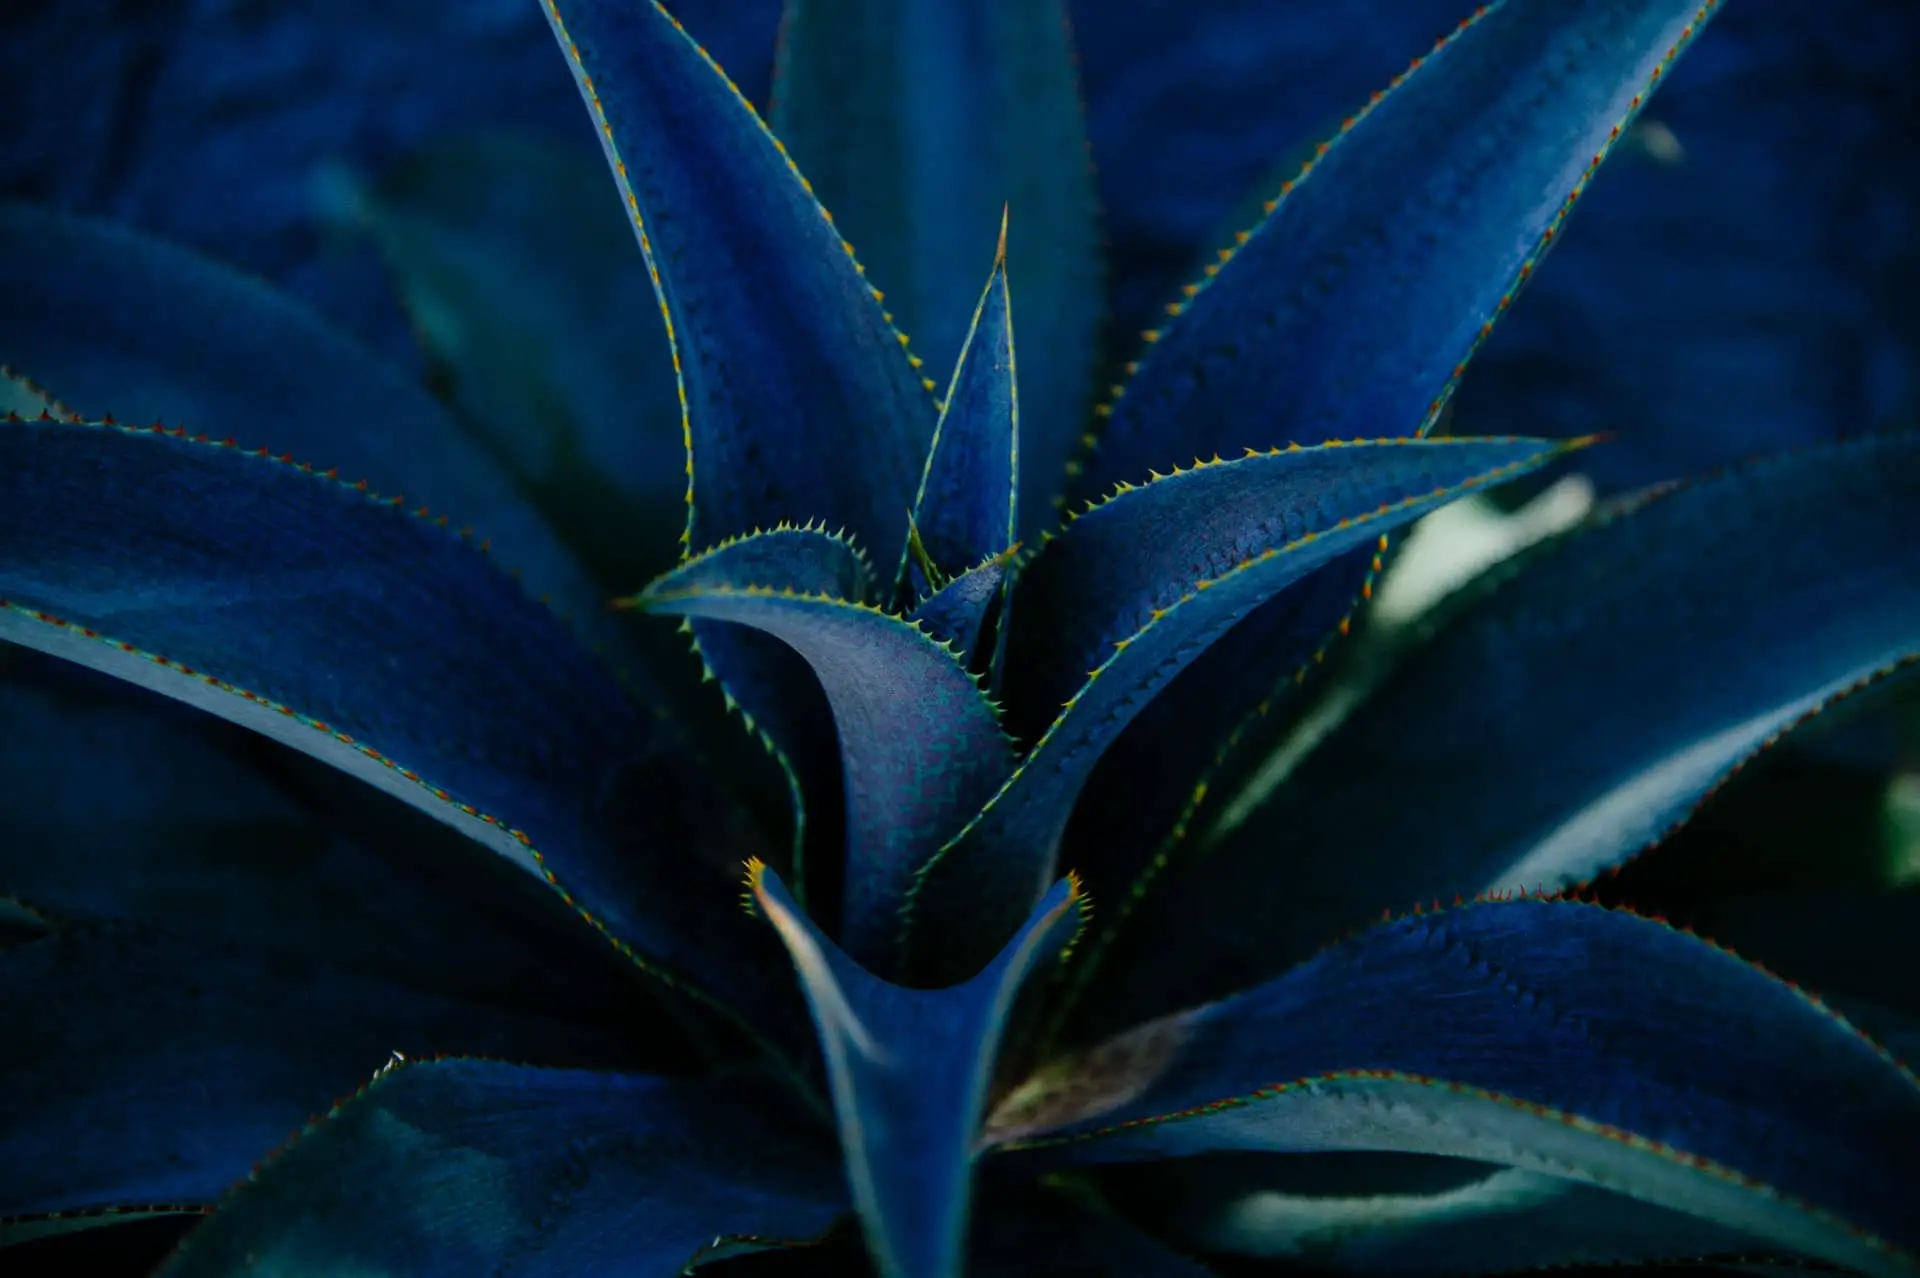 Blue agave plant